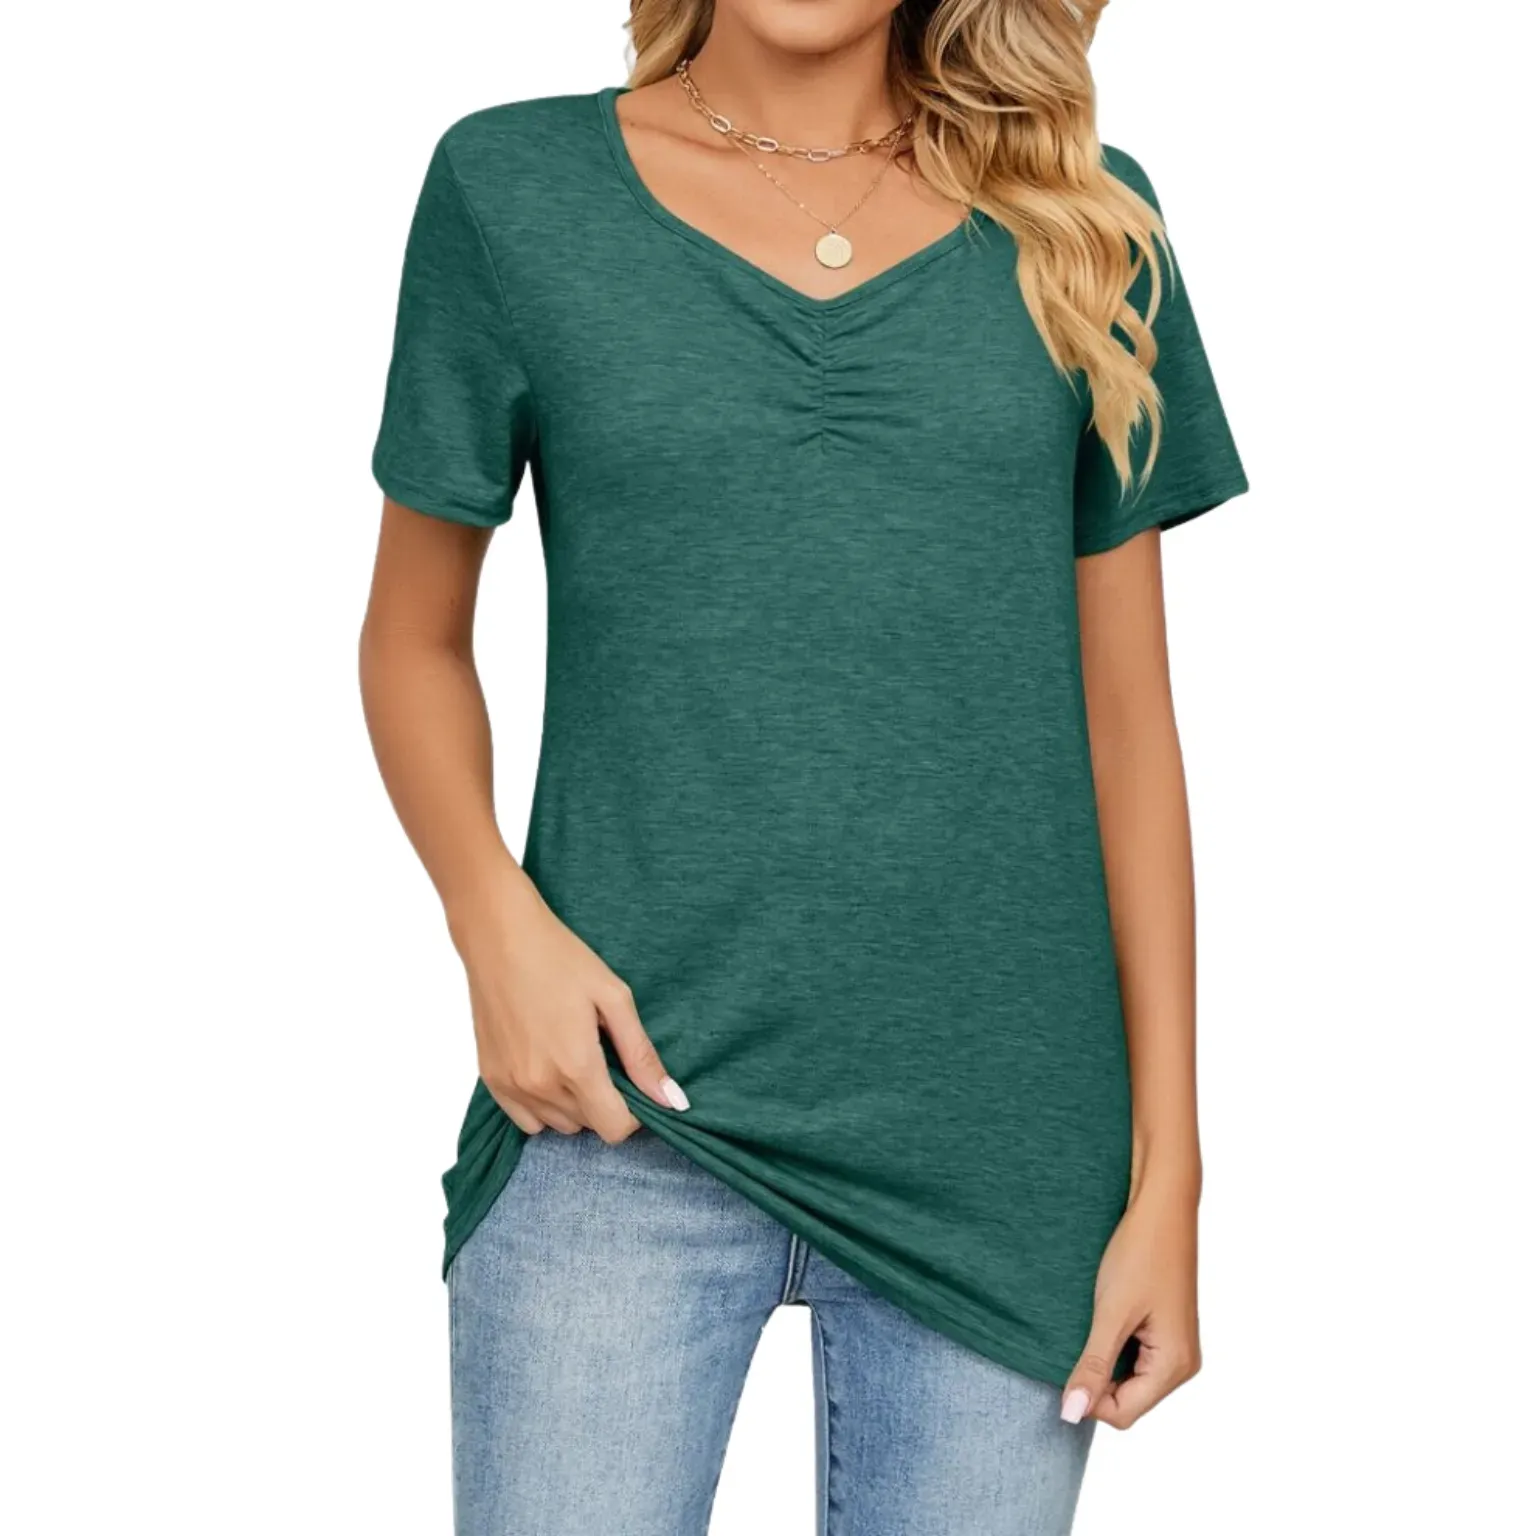 Casual Loose T-Shirt manufacturing with superior quality